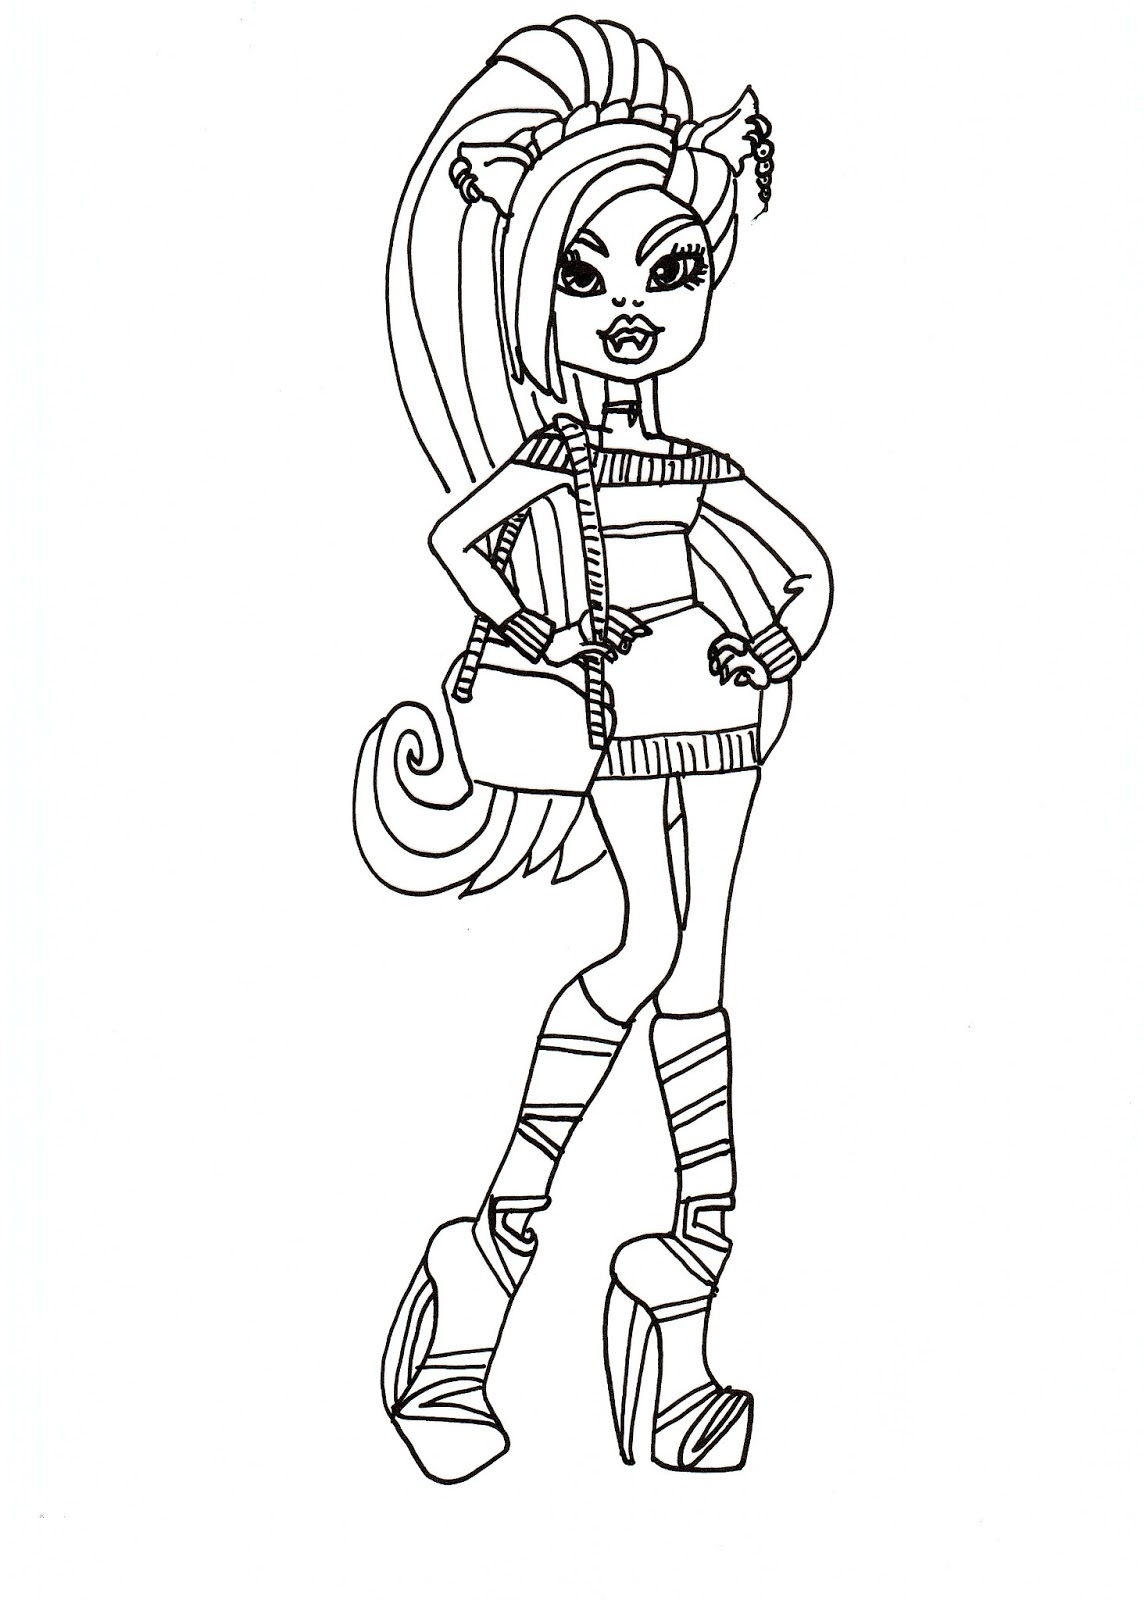 Free Printable Monster High Coloring Pages: September 2012